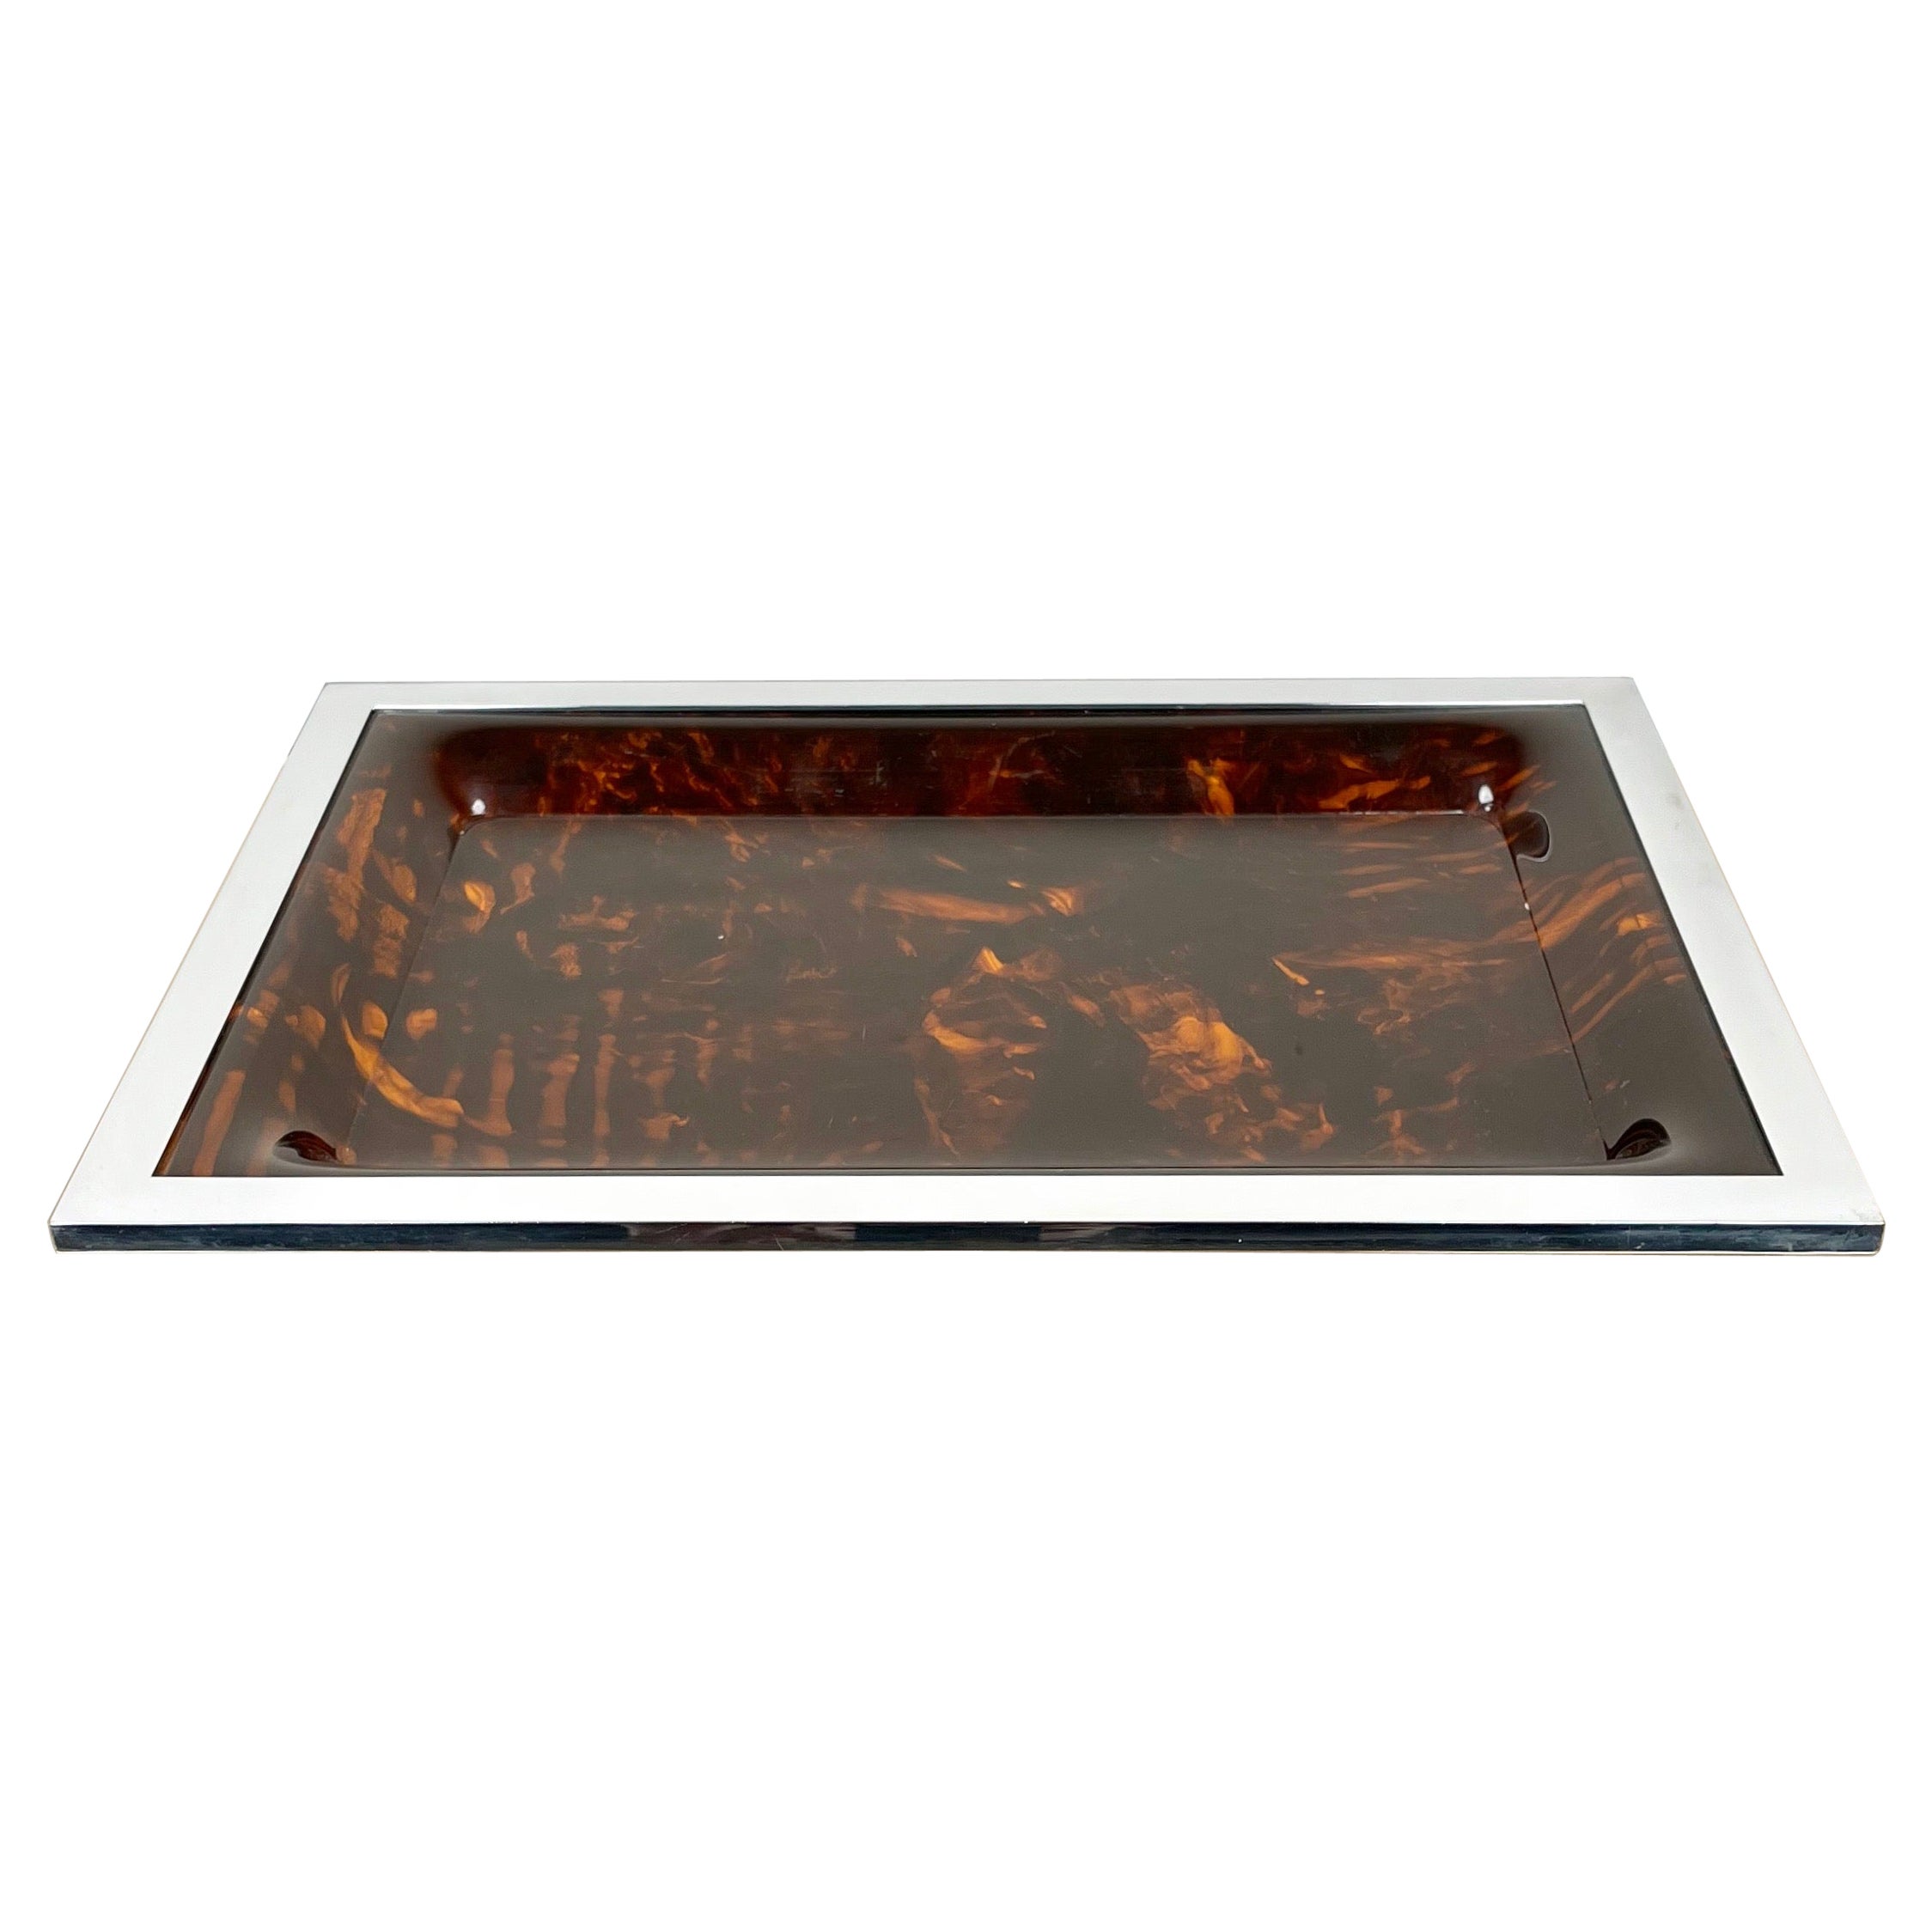 Serving Tray Lucite Tortoiseshell & Chrome Christian Dior Style, Italy, 1970s For Sale